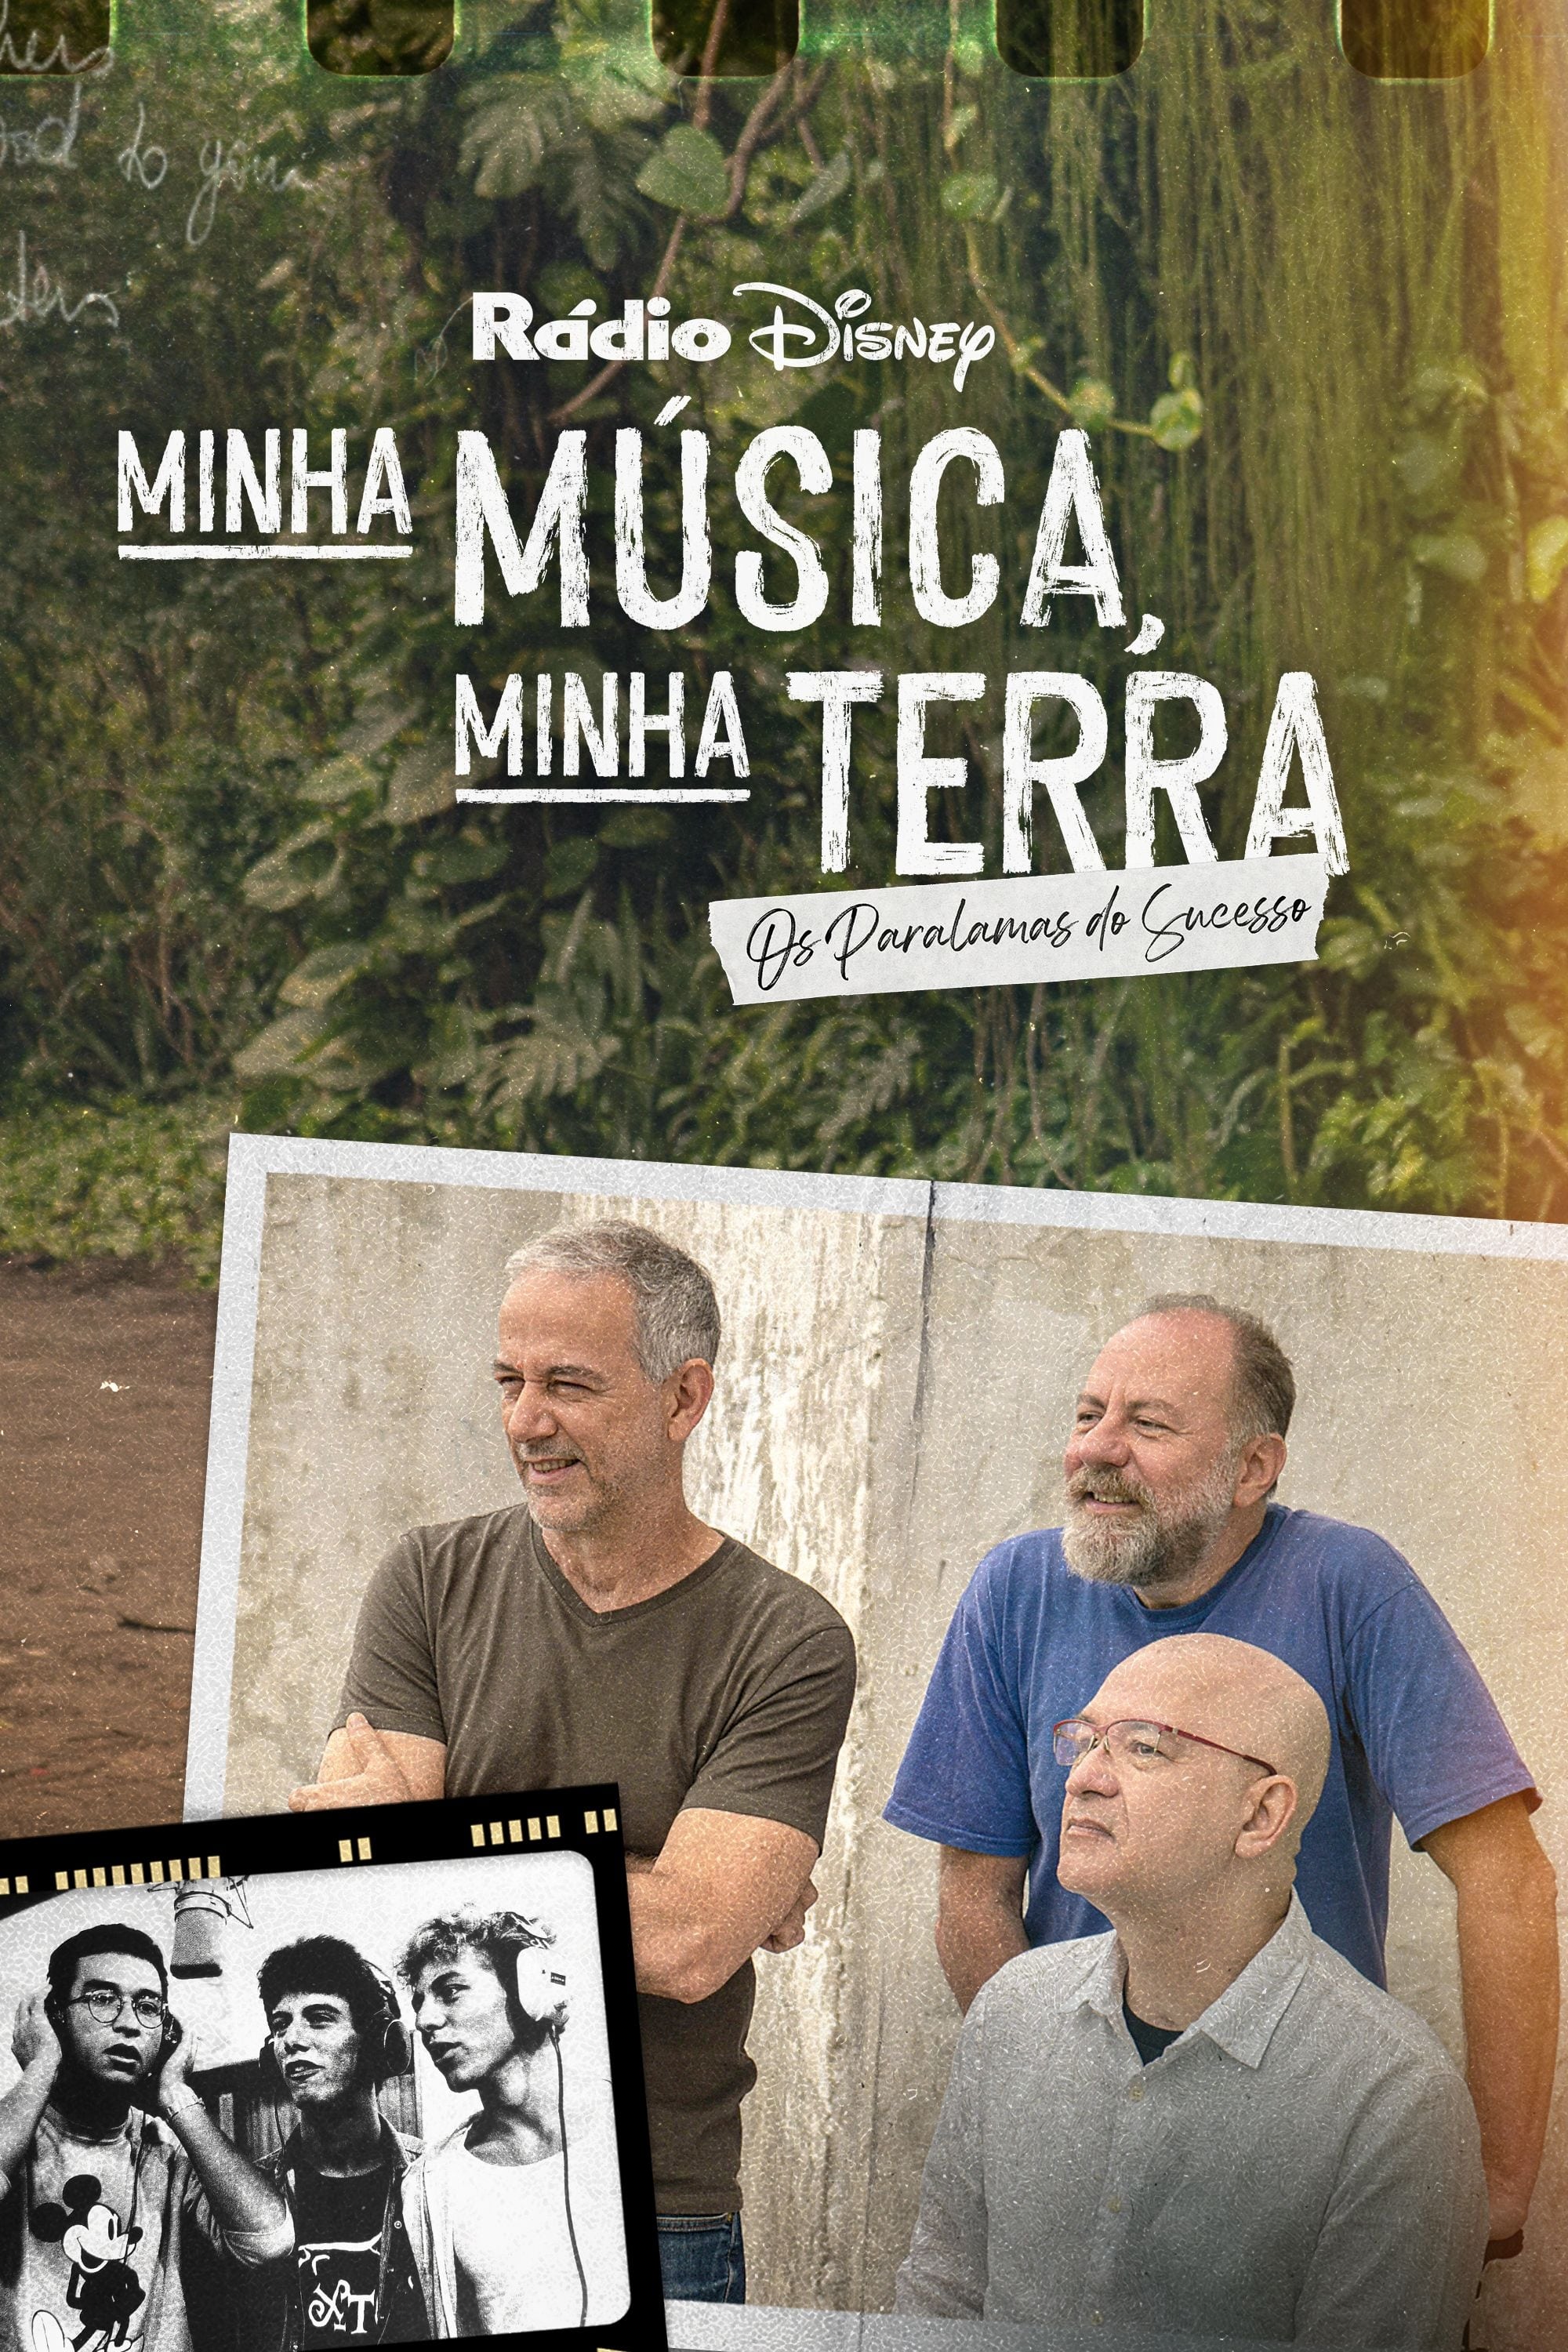 My Music, My Roots: Os Paralamas do Sucesso